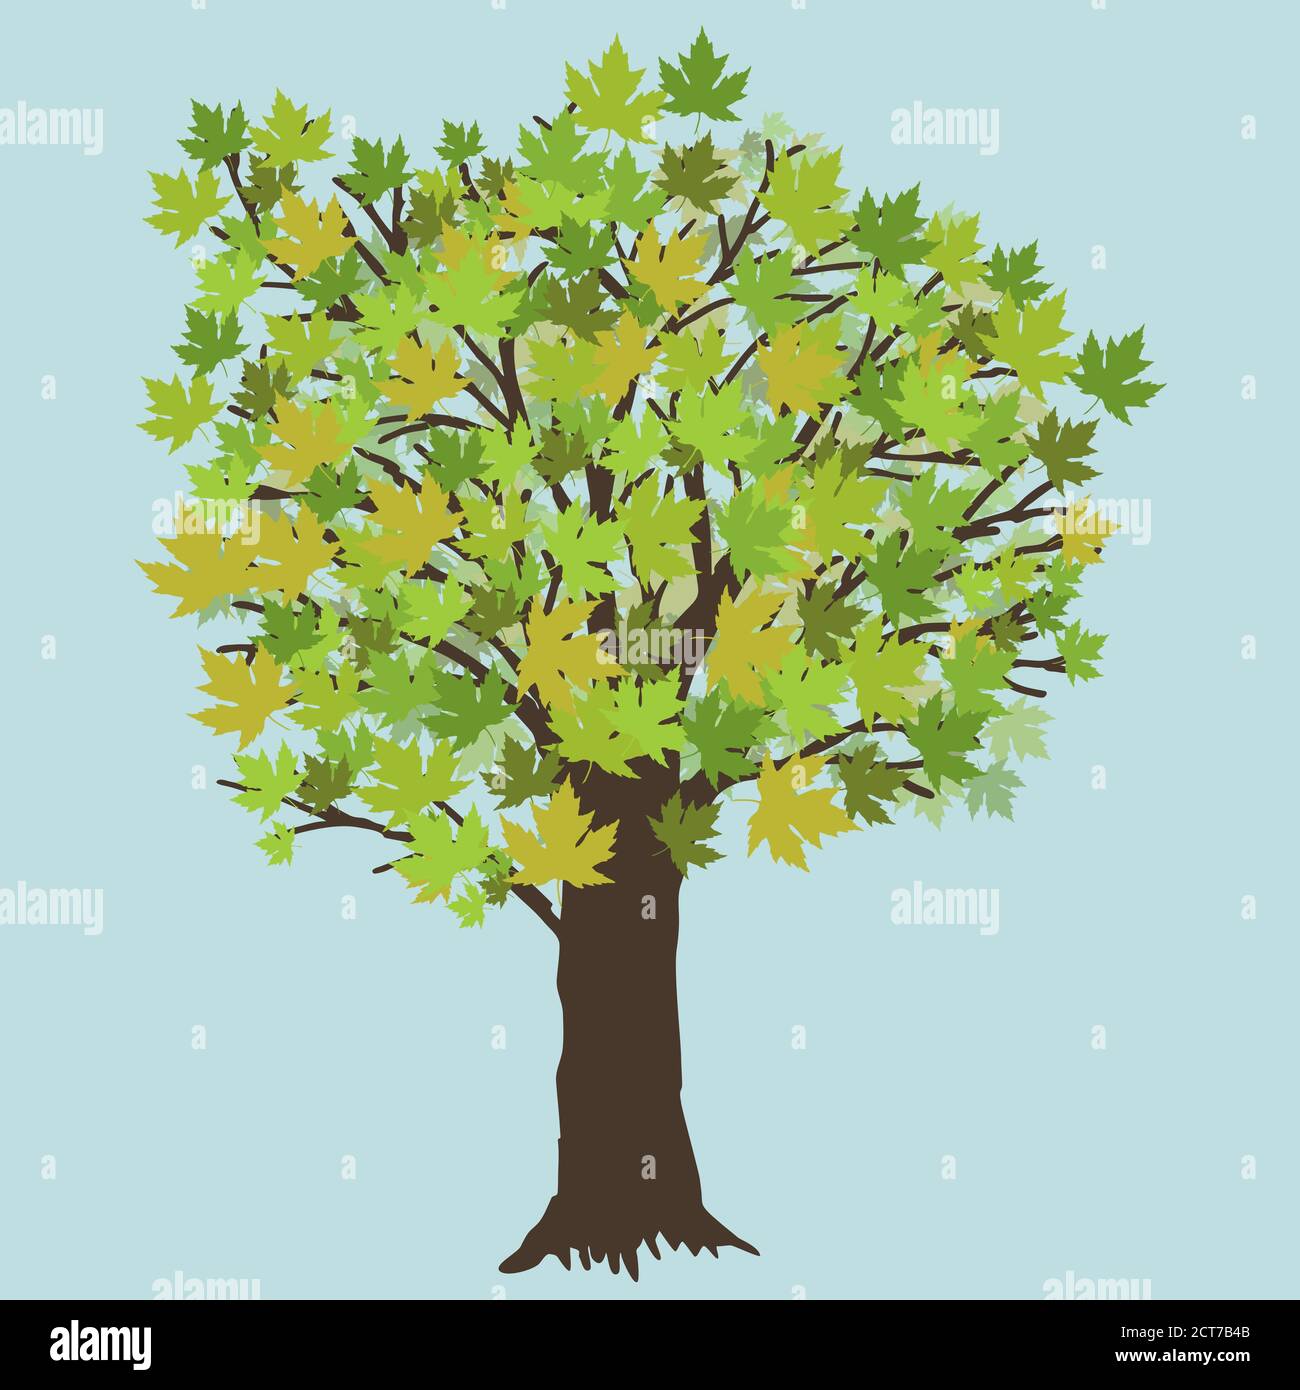 A vector illustration of a maple tree during summer. The tree has green leafs. Stock Vector